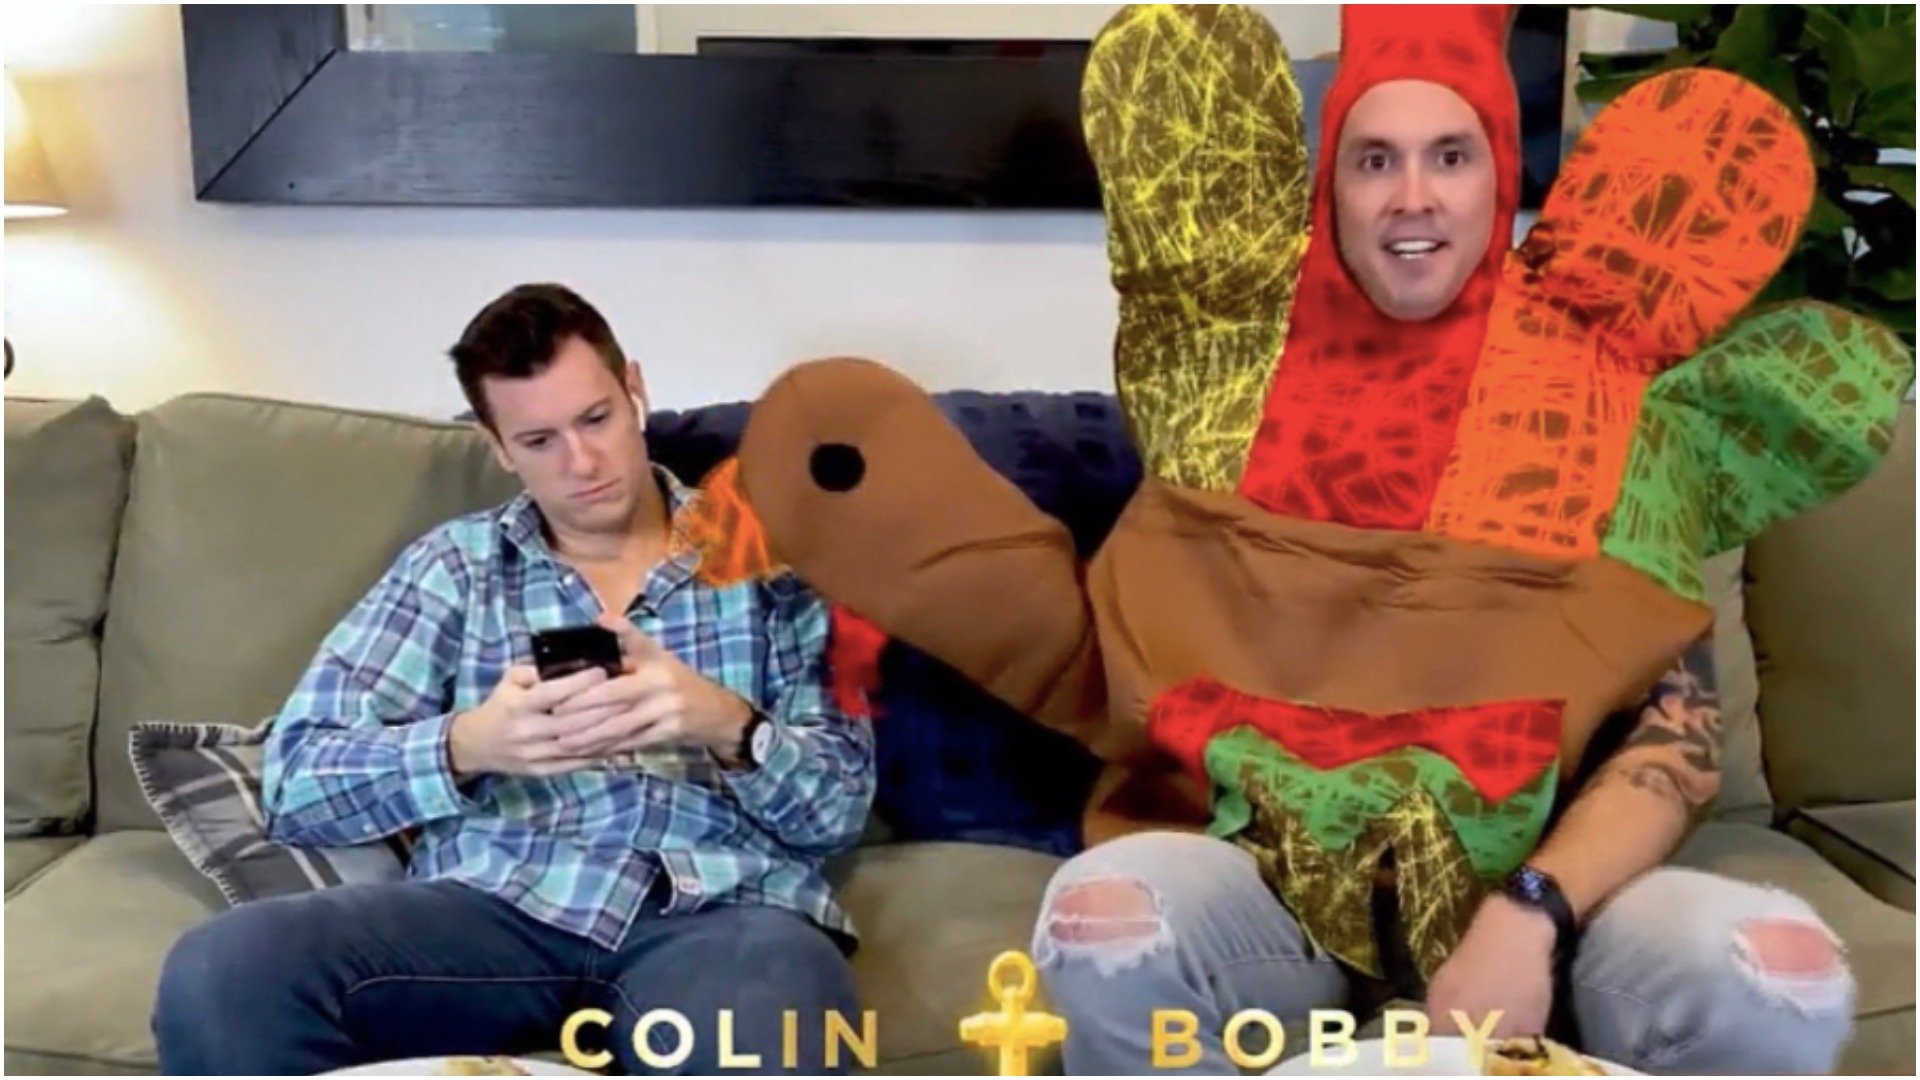 Colin Macy-O'Toole looks at his phone while Bobby Giancola wears a turkey suit while sitting on the couch